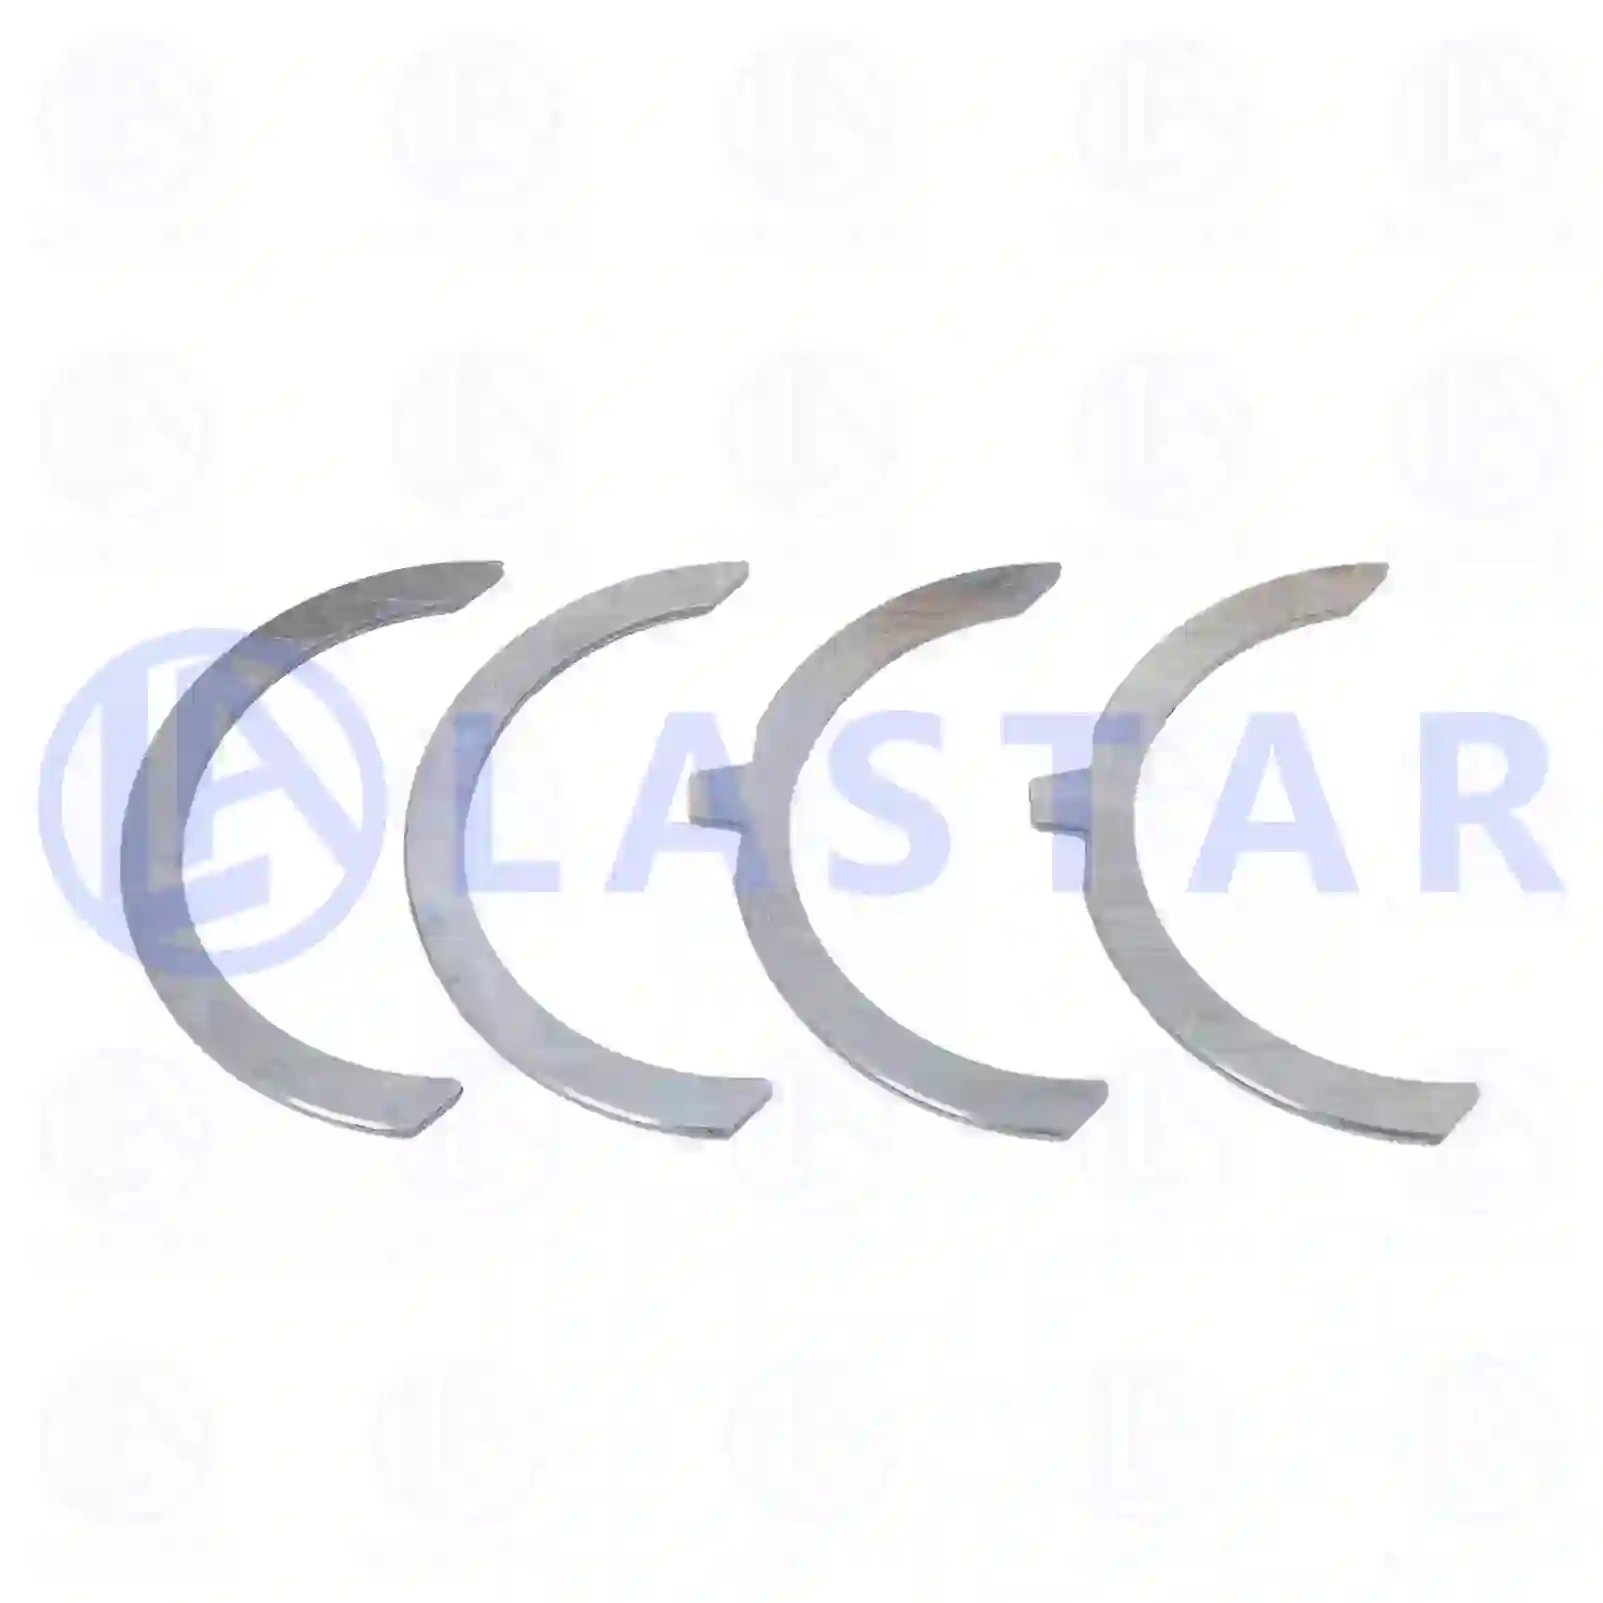  Thrust washer kit || Lastar Spare Part | Truck Spare Parts, Auotomotive Spare Parts